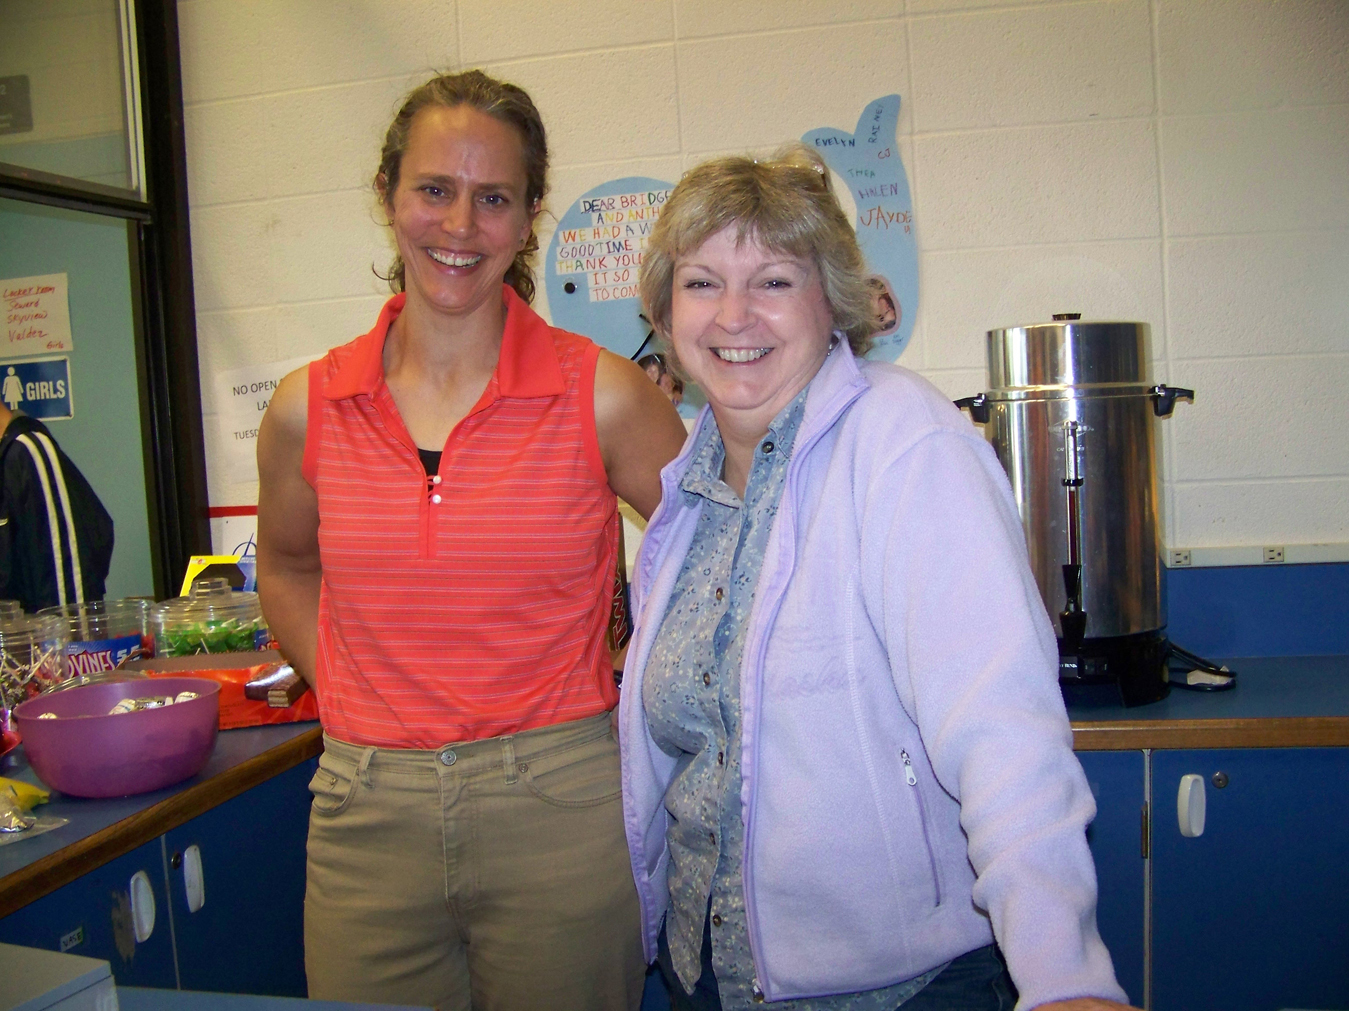 Want to watch swimmers and divers at the Homer Invite? Want a cup of coffee or a snack? Homer High School parents Michelle Waclawski, left, and Vicky Peters, are there to help. Parents of cross country runners, they keep concessions open so parents of athletes on the dive and swim teams can cheer.-Photo by McKibben Jackinsky, Homer News